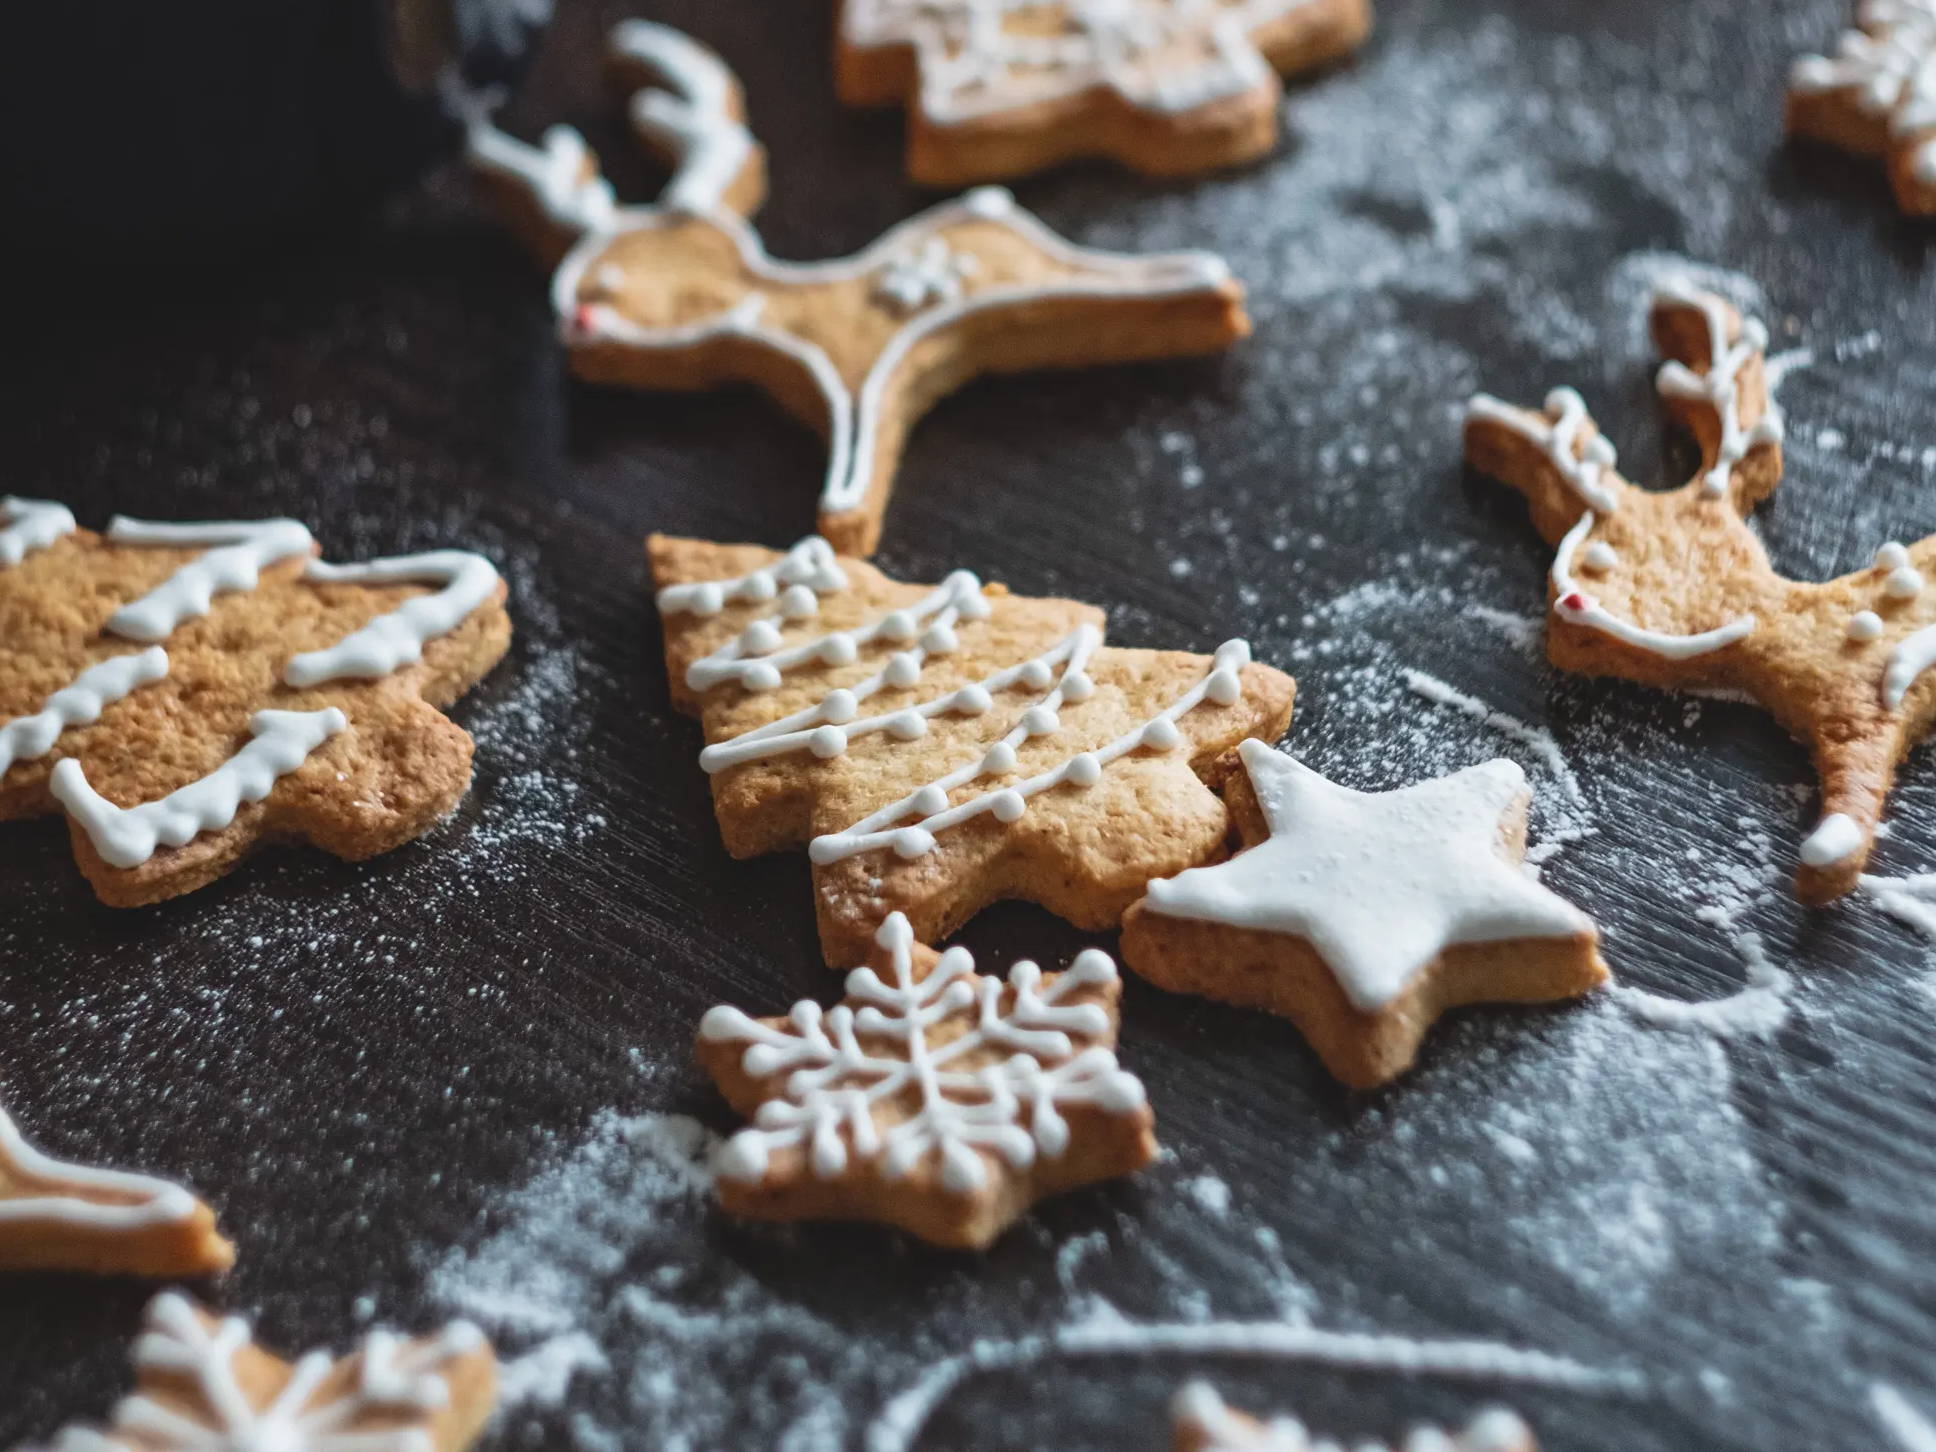 Iced and decorated gingerbread cookies on a counter dusted with flour.